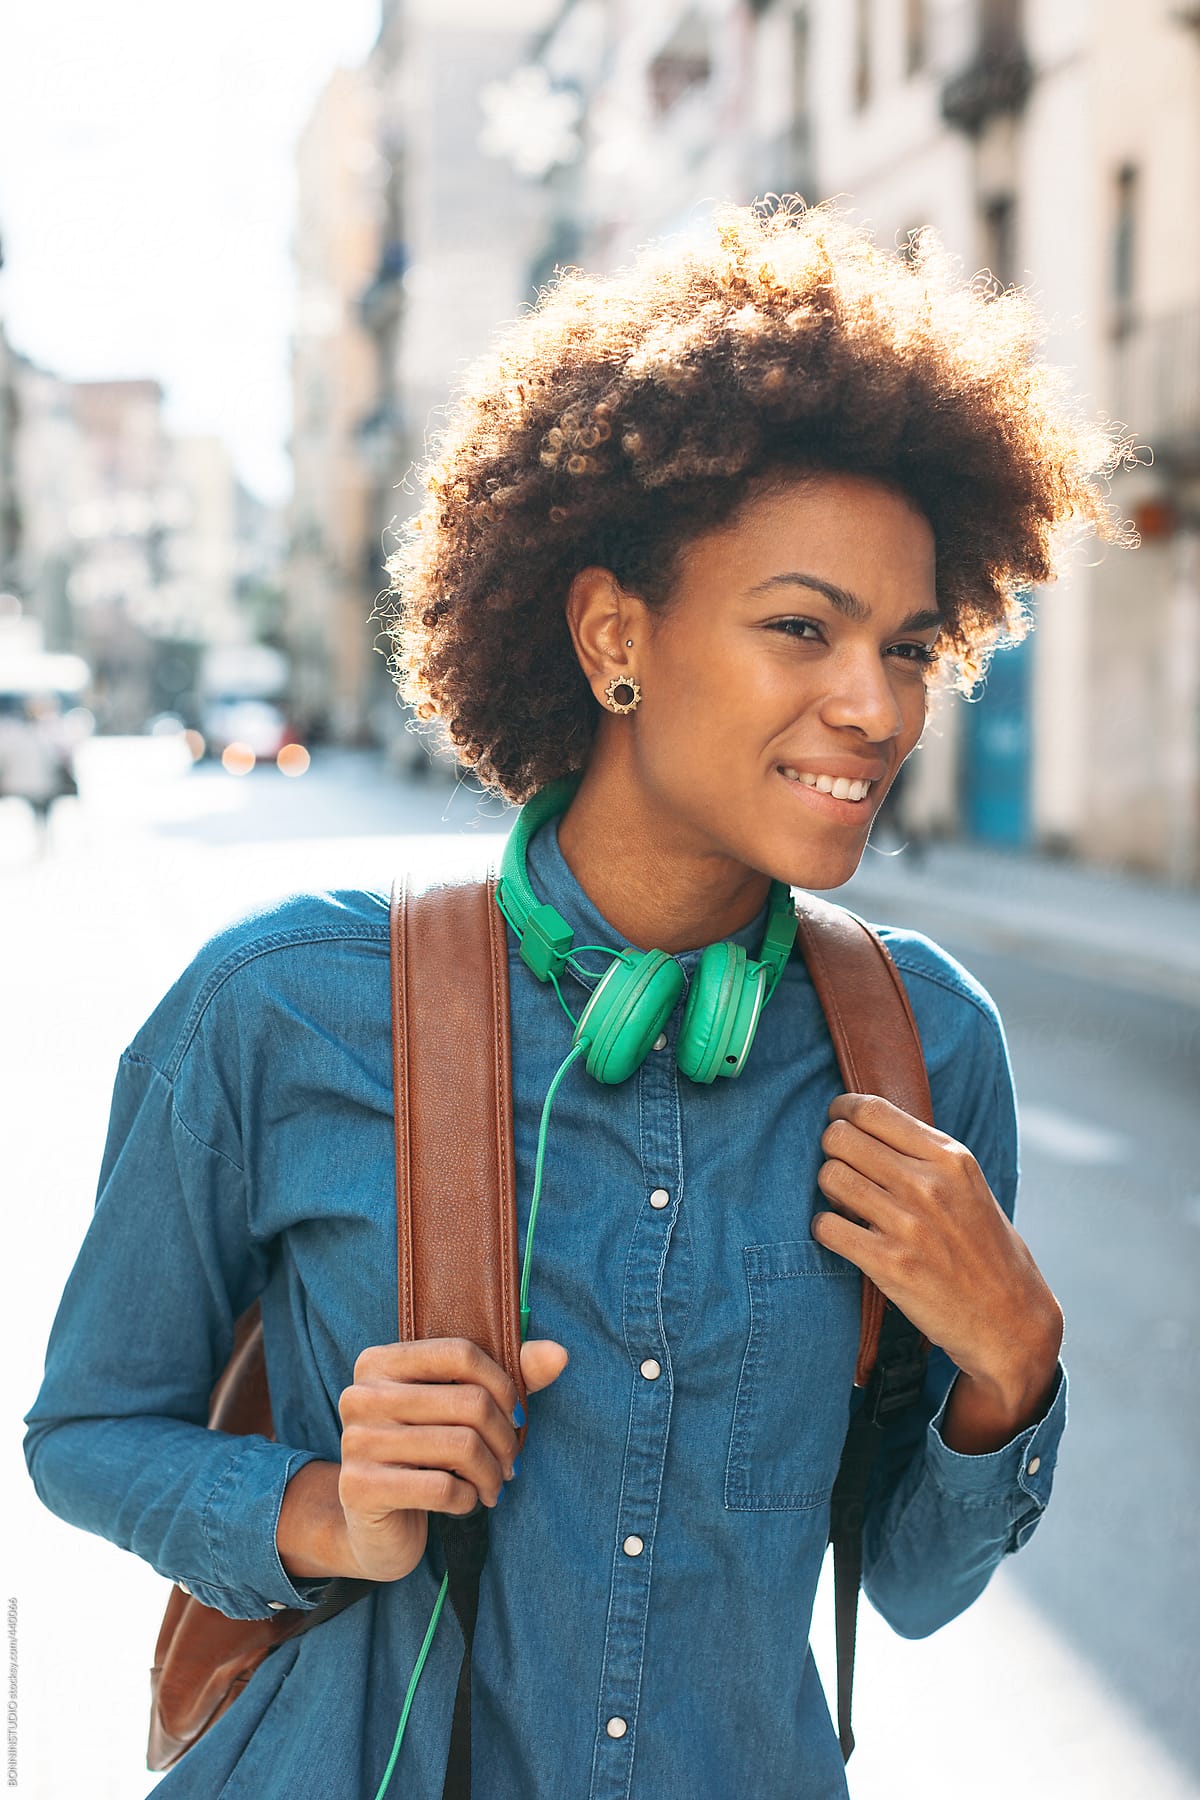 Afro american woman with leather backpack and green headphones smiling in outdoors.